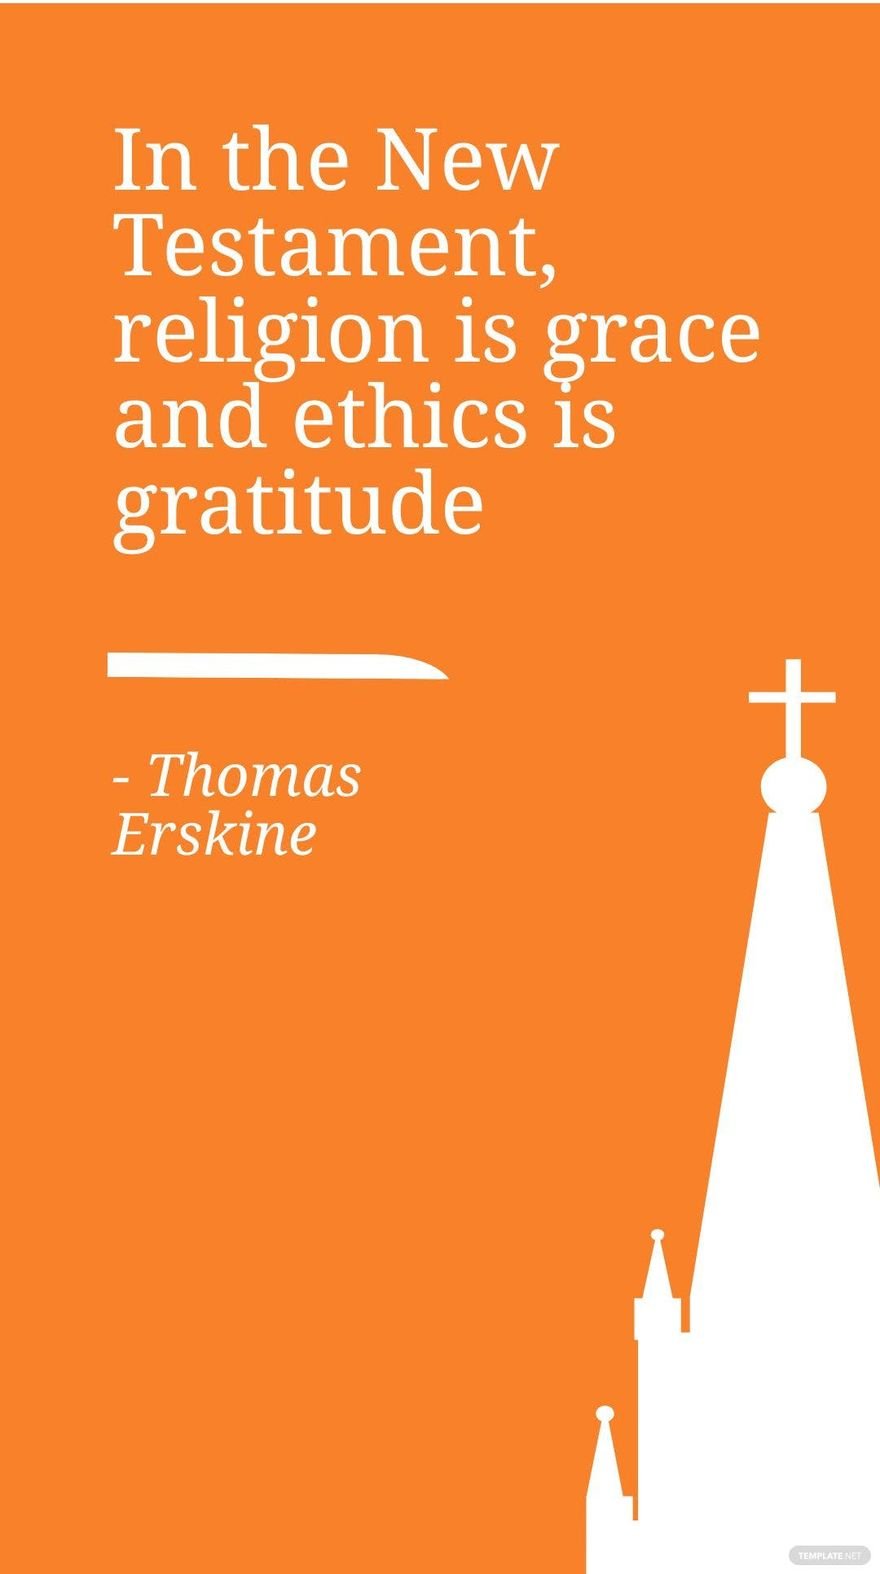 Free Thomas Erskine -In the New Testament, religion is grace and ethics is gratitude